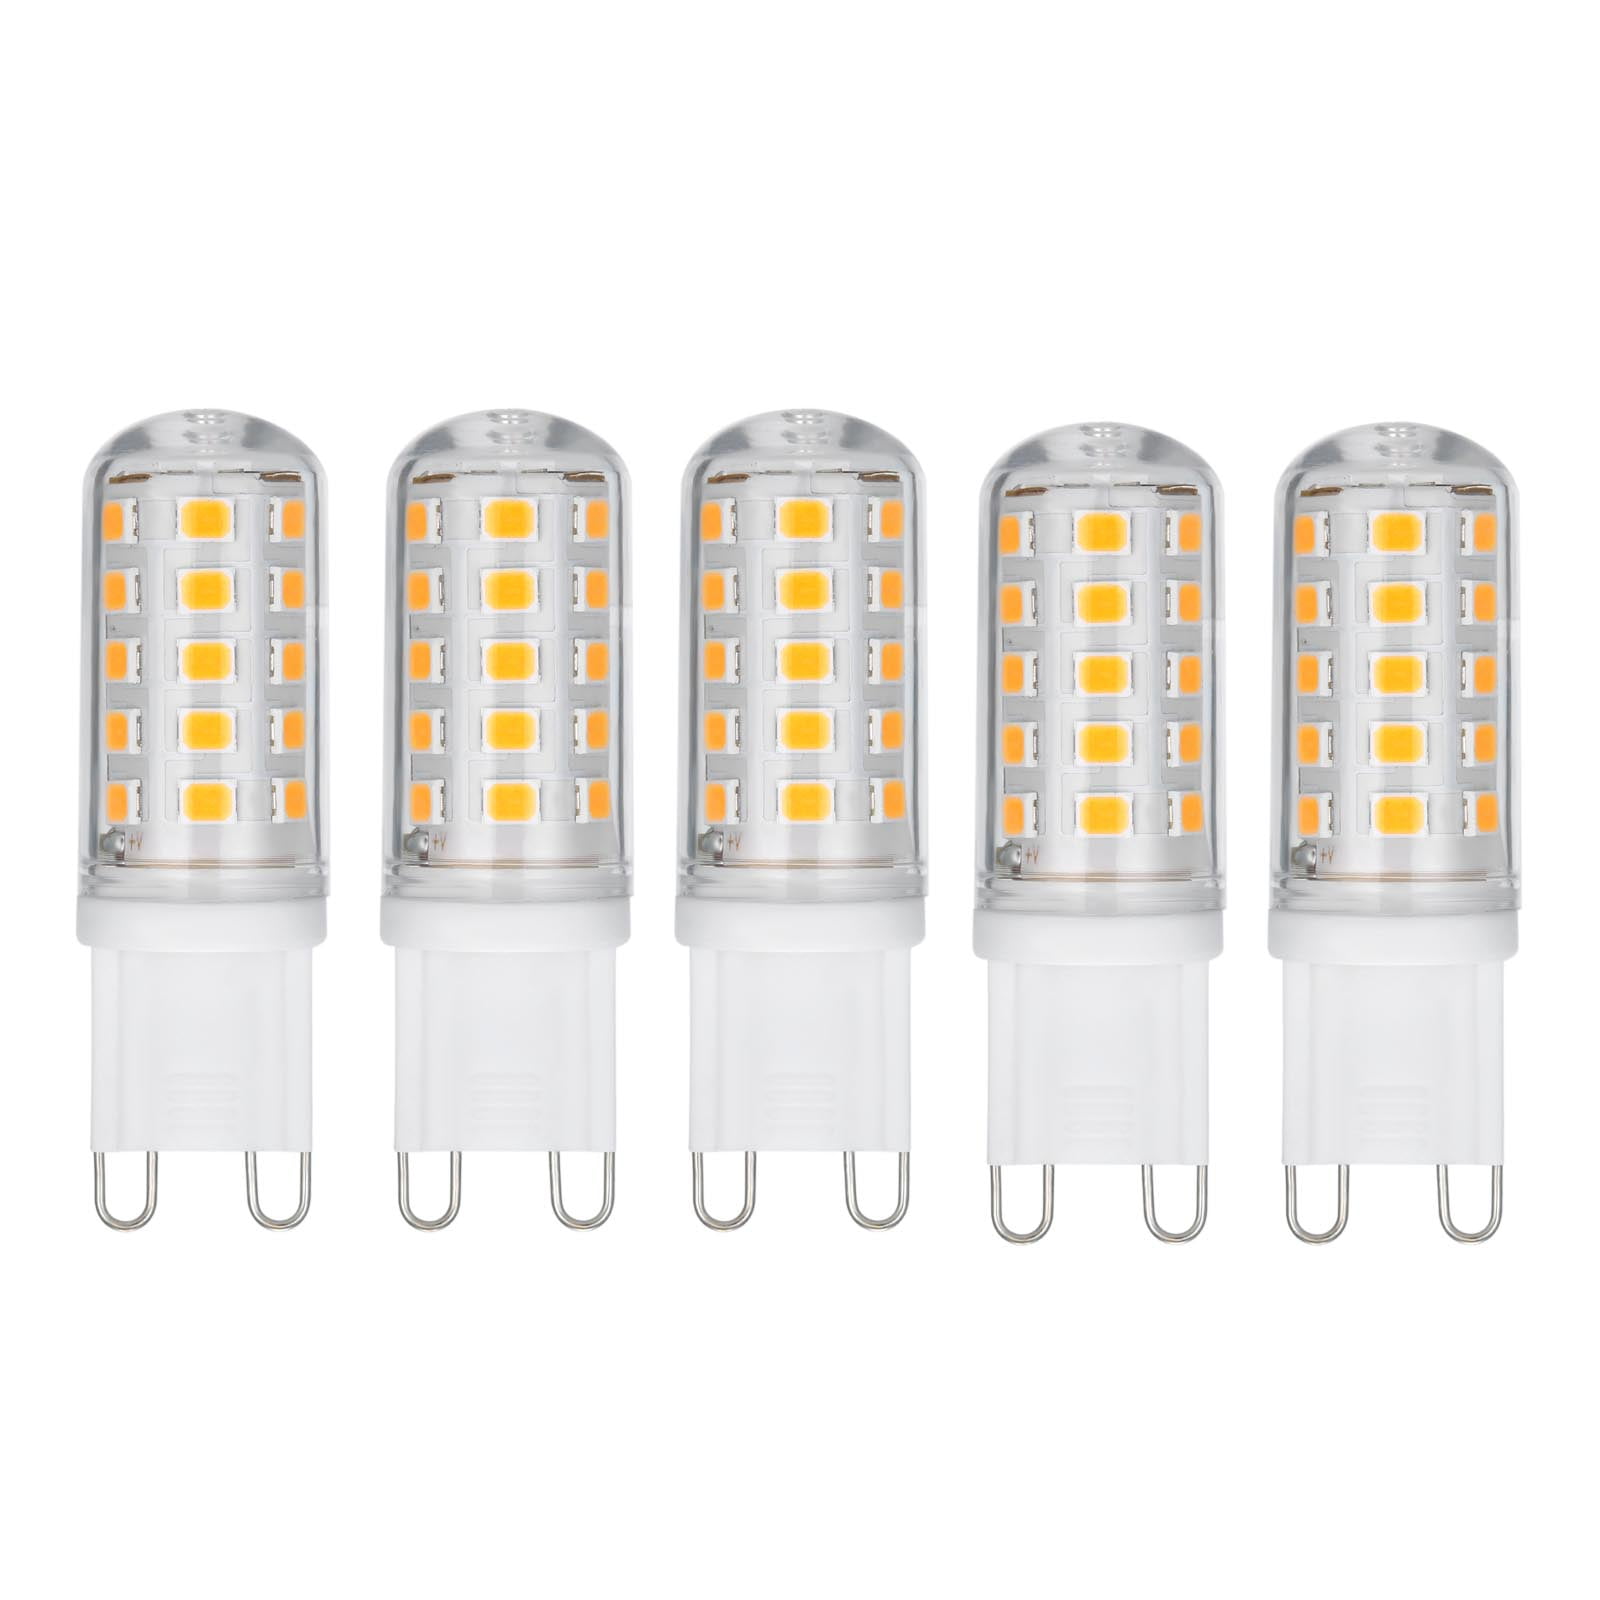 Dimmable Clear Capsule 60W 230V 2800K Warm White Light No Flicker 360° Viewing Angle 12pack G9 Halogen Bulbs No Strobe 60W